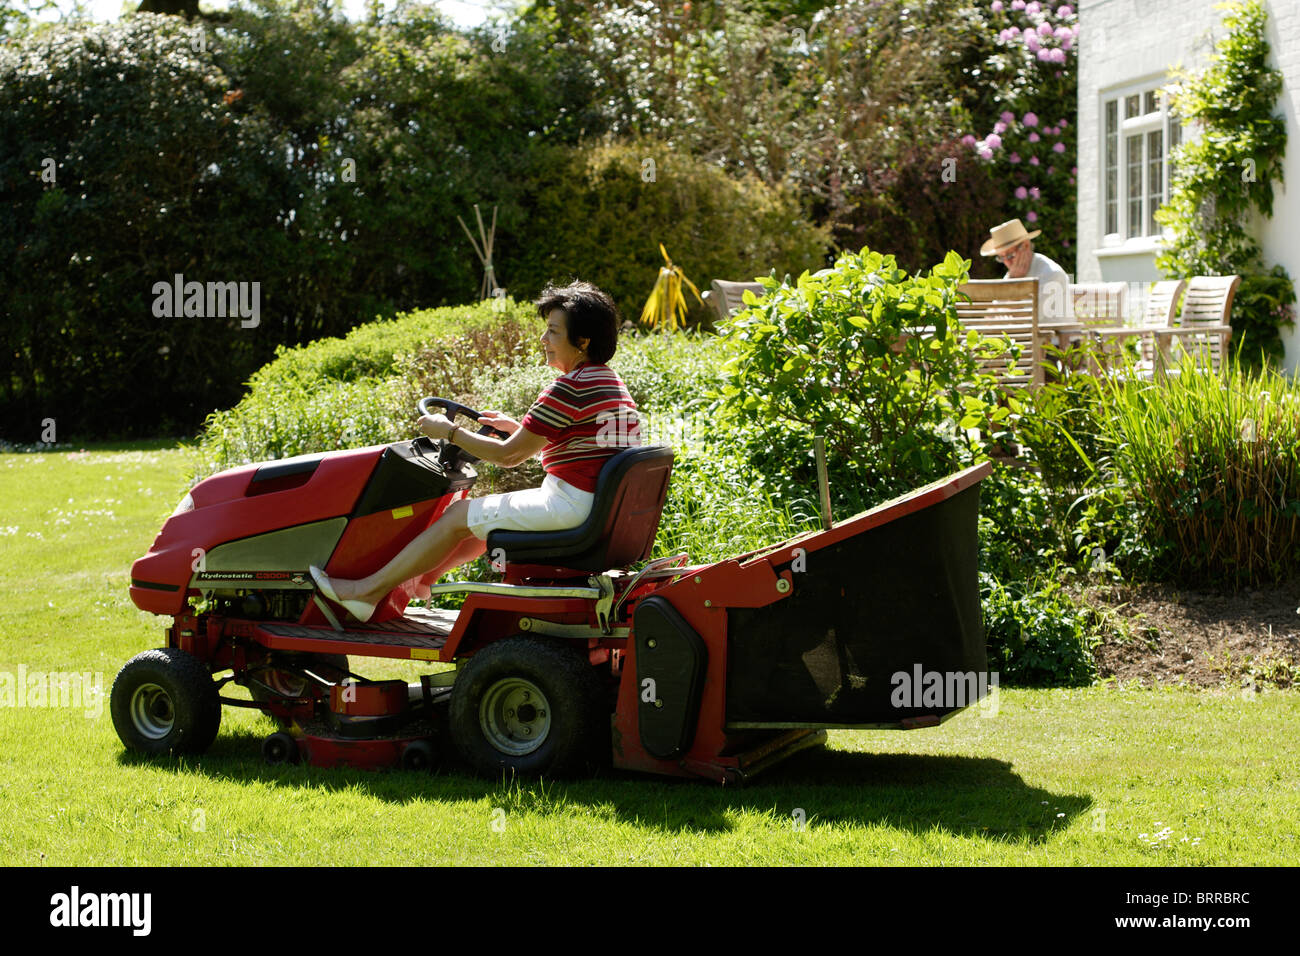 retired older woman using a ride on lawnmower Stock Photo